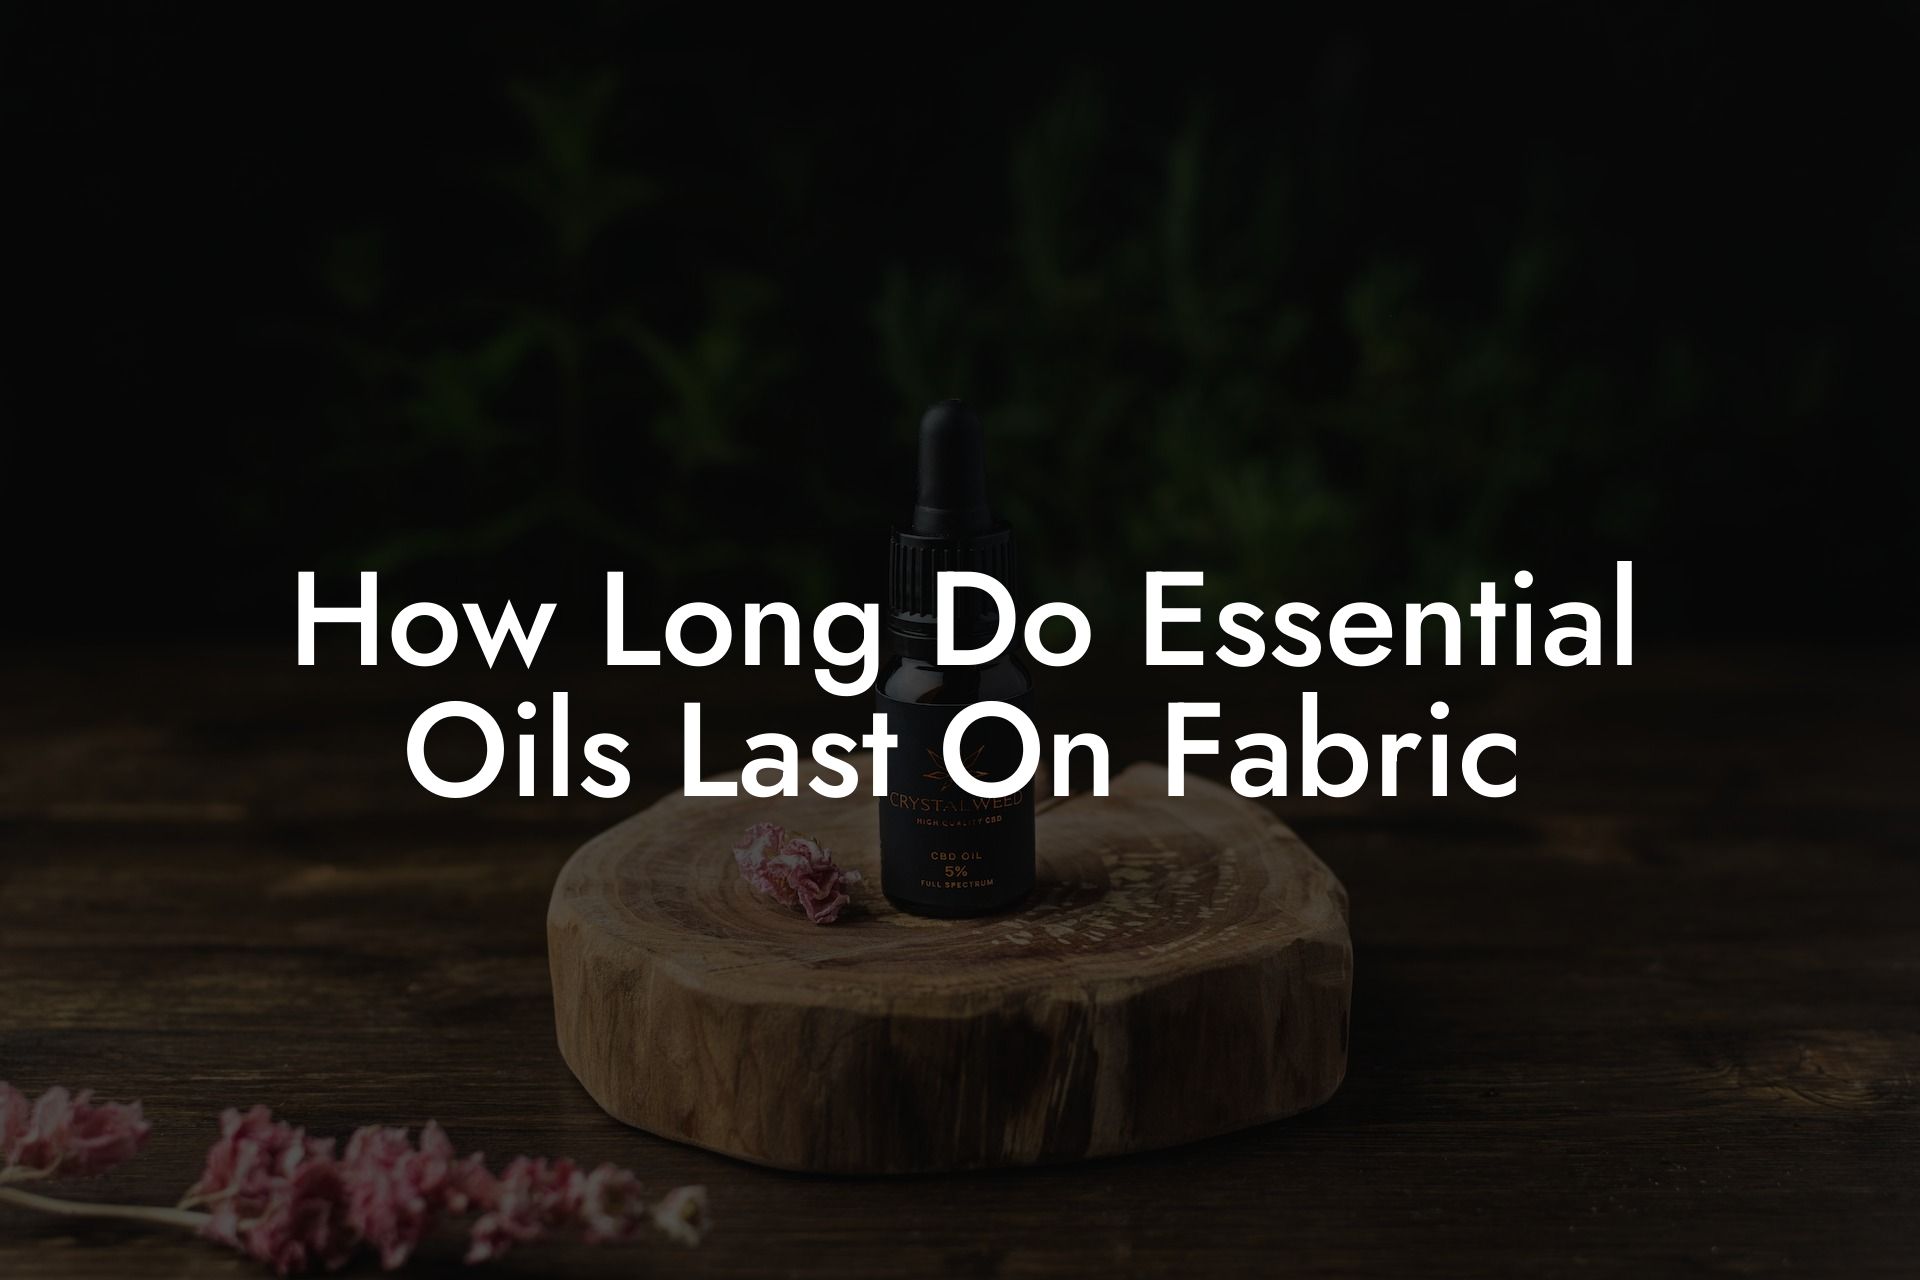 How Long Do Essential Oils Last On Fabric